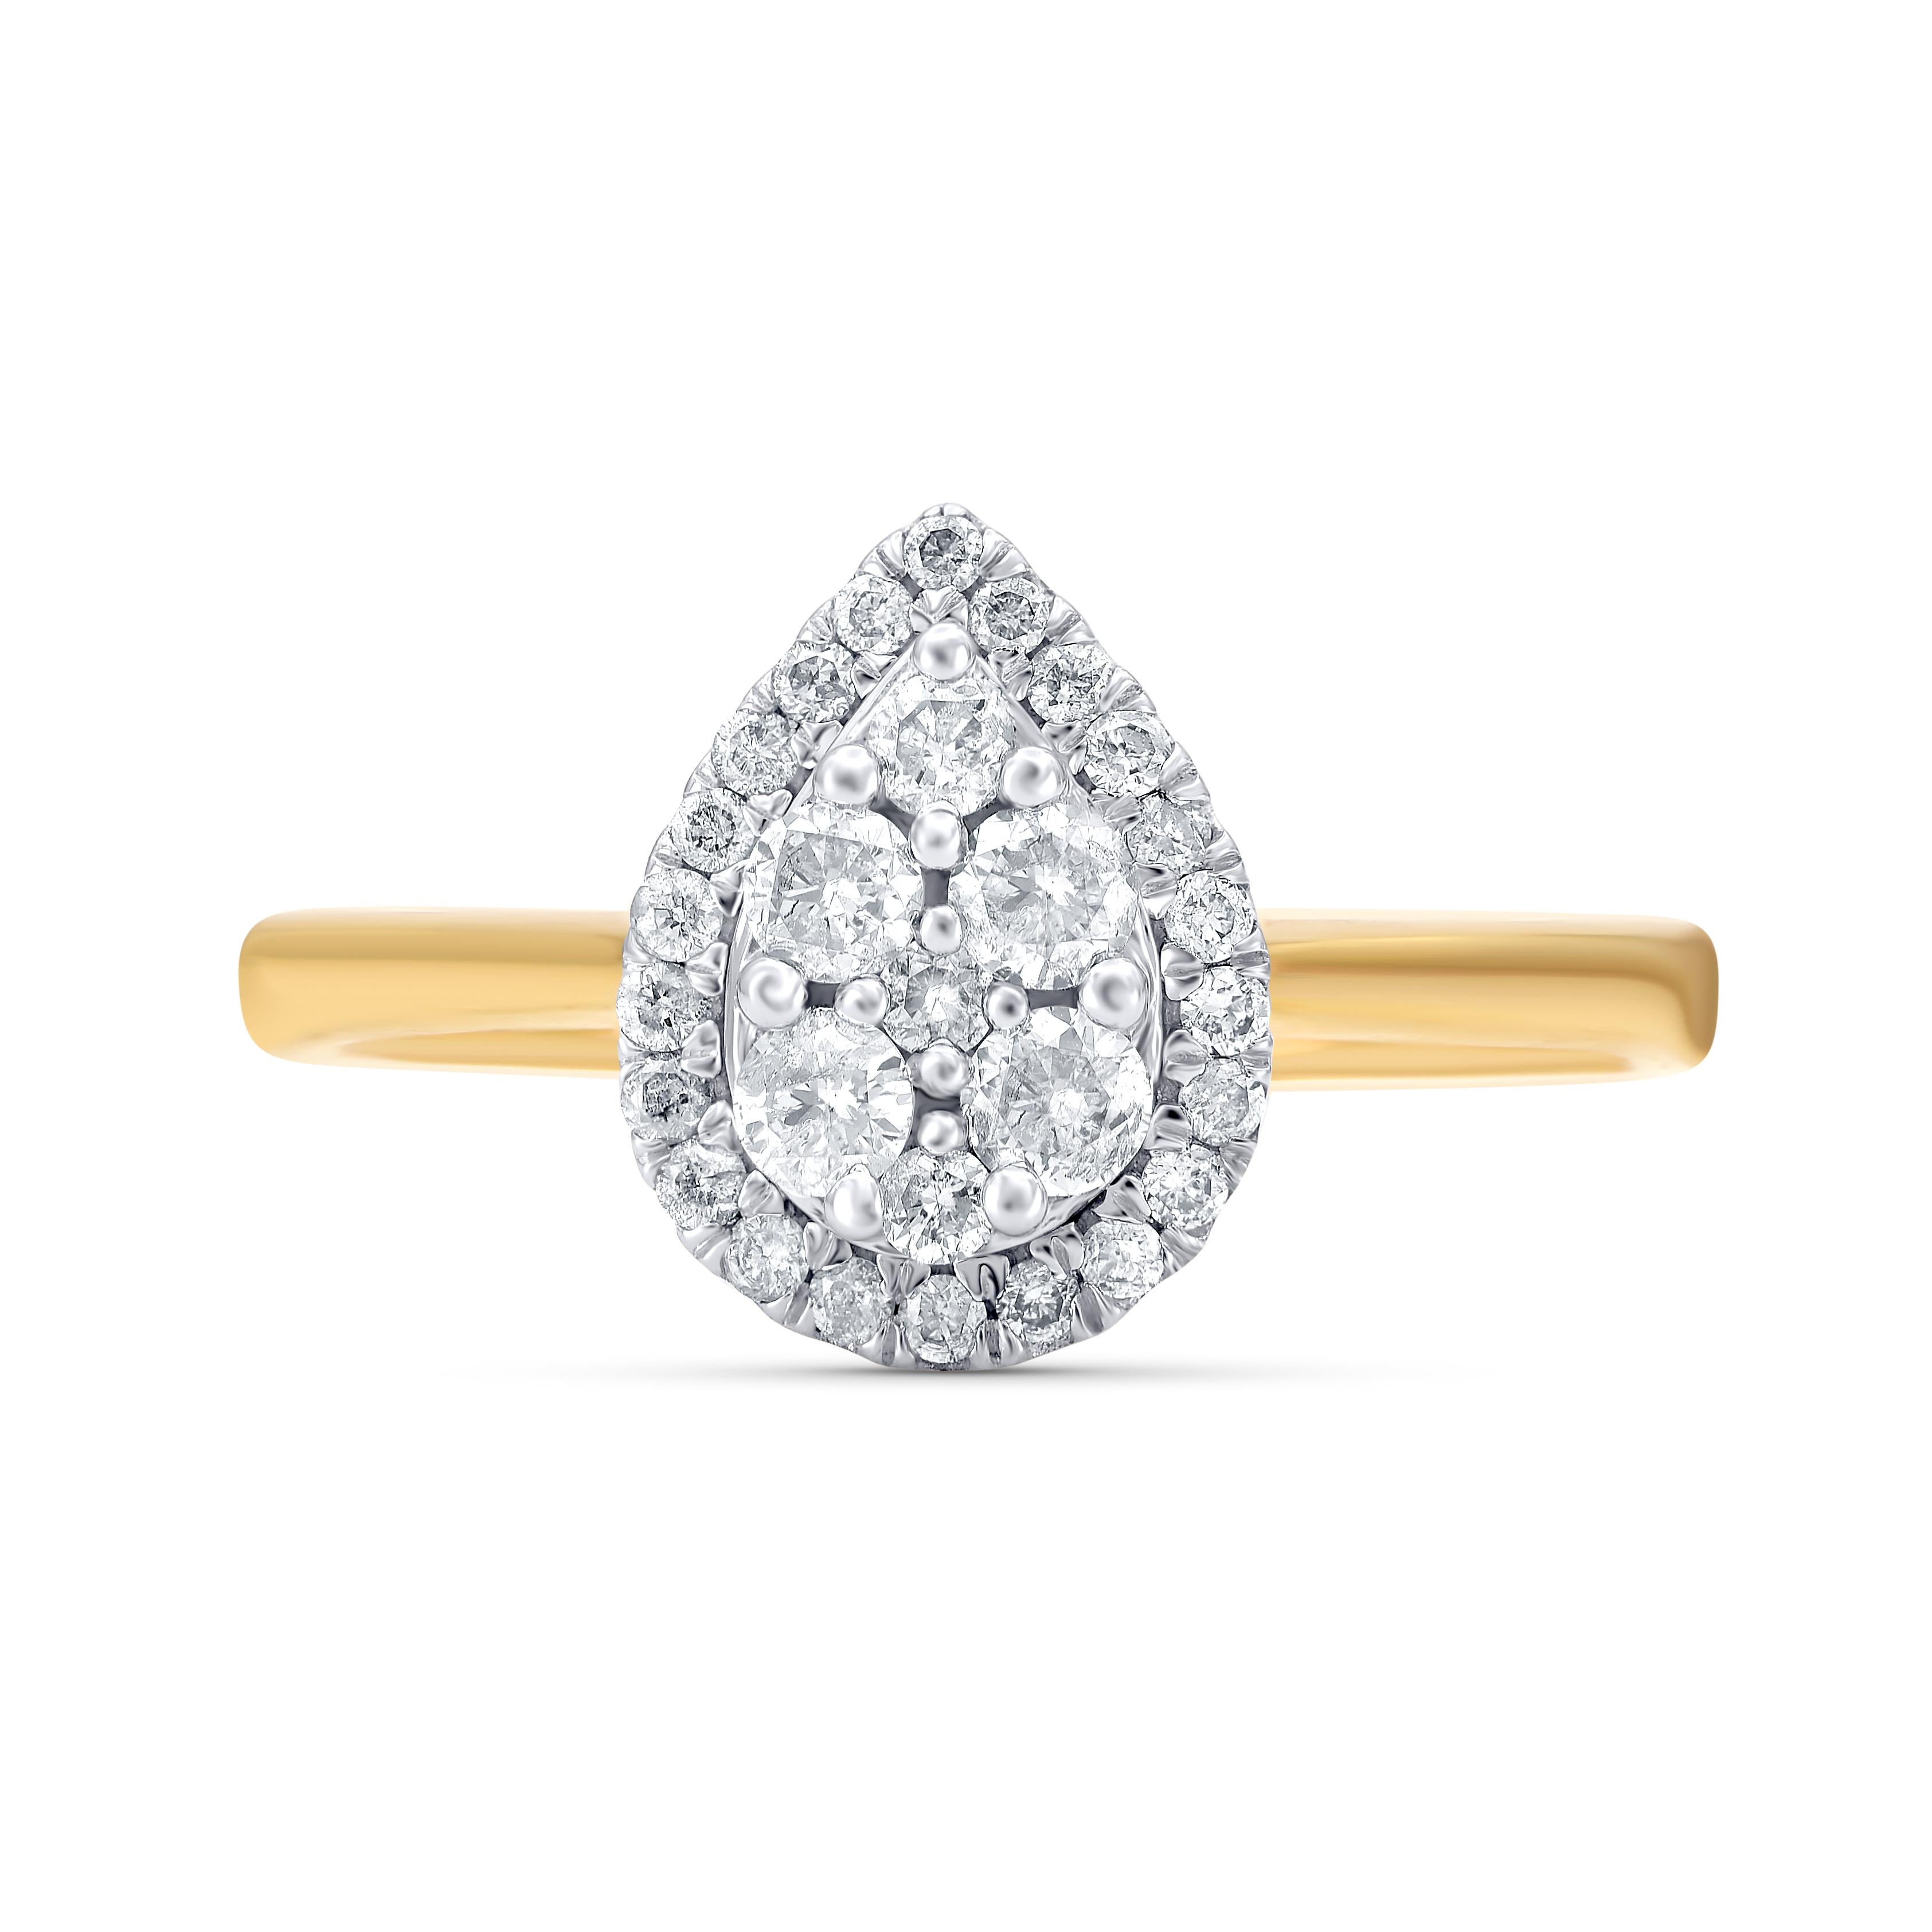 Win her heart with this classic and elegant diamond ring. The diamond ring is crafted from 14 karat yellow gold with 29 brilliant cut diamonds set in prong & pressure setting, dazzles in H-I color I2 clarity and a high polish finish complete the